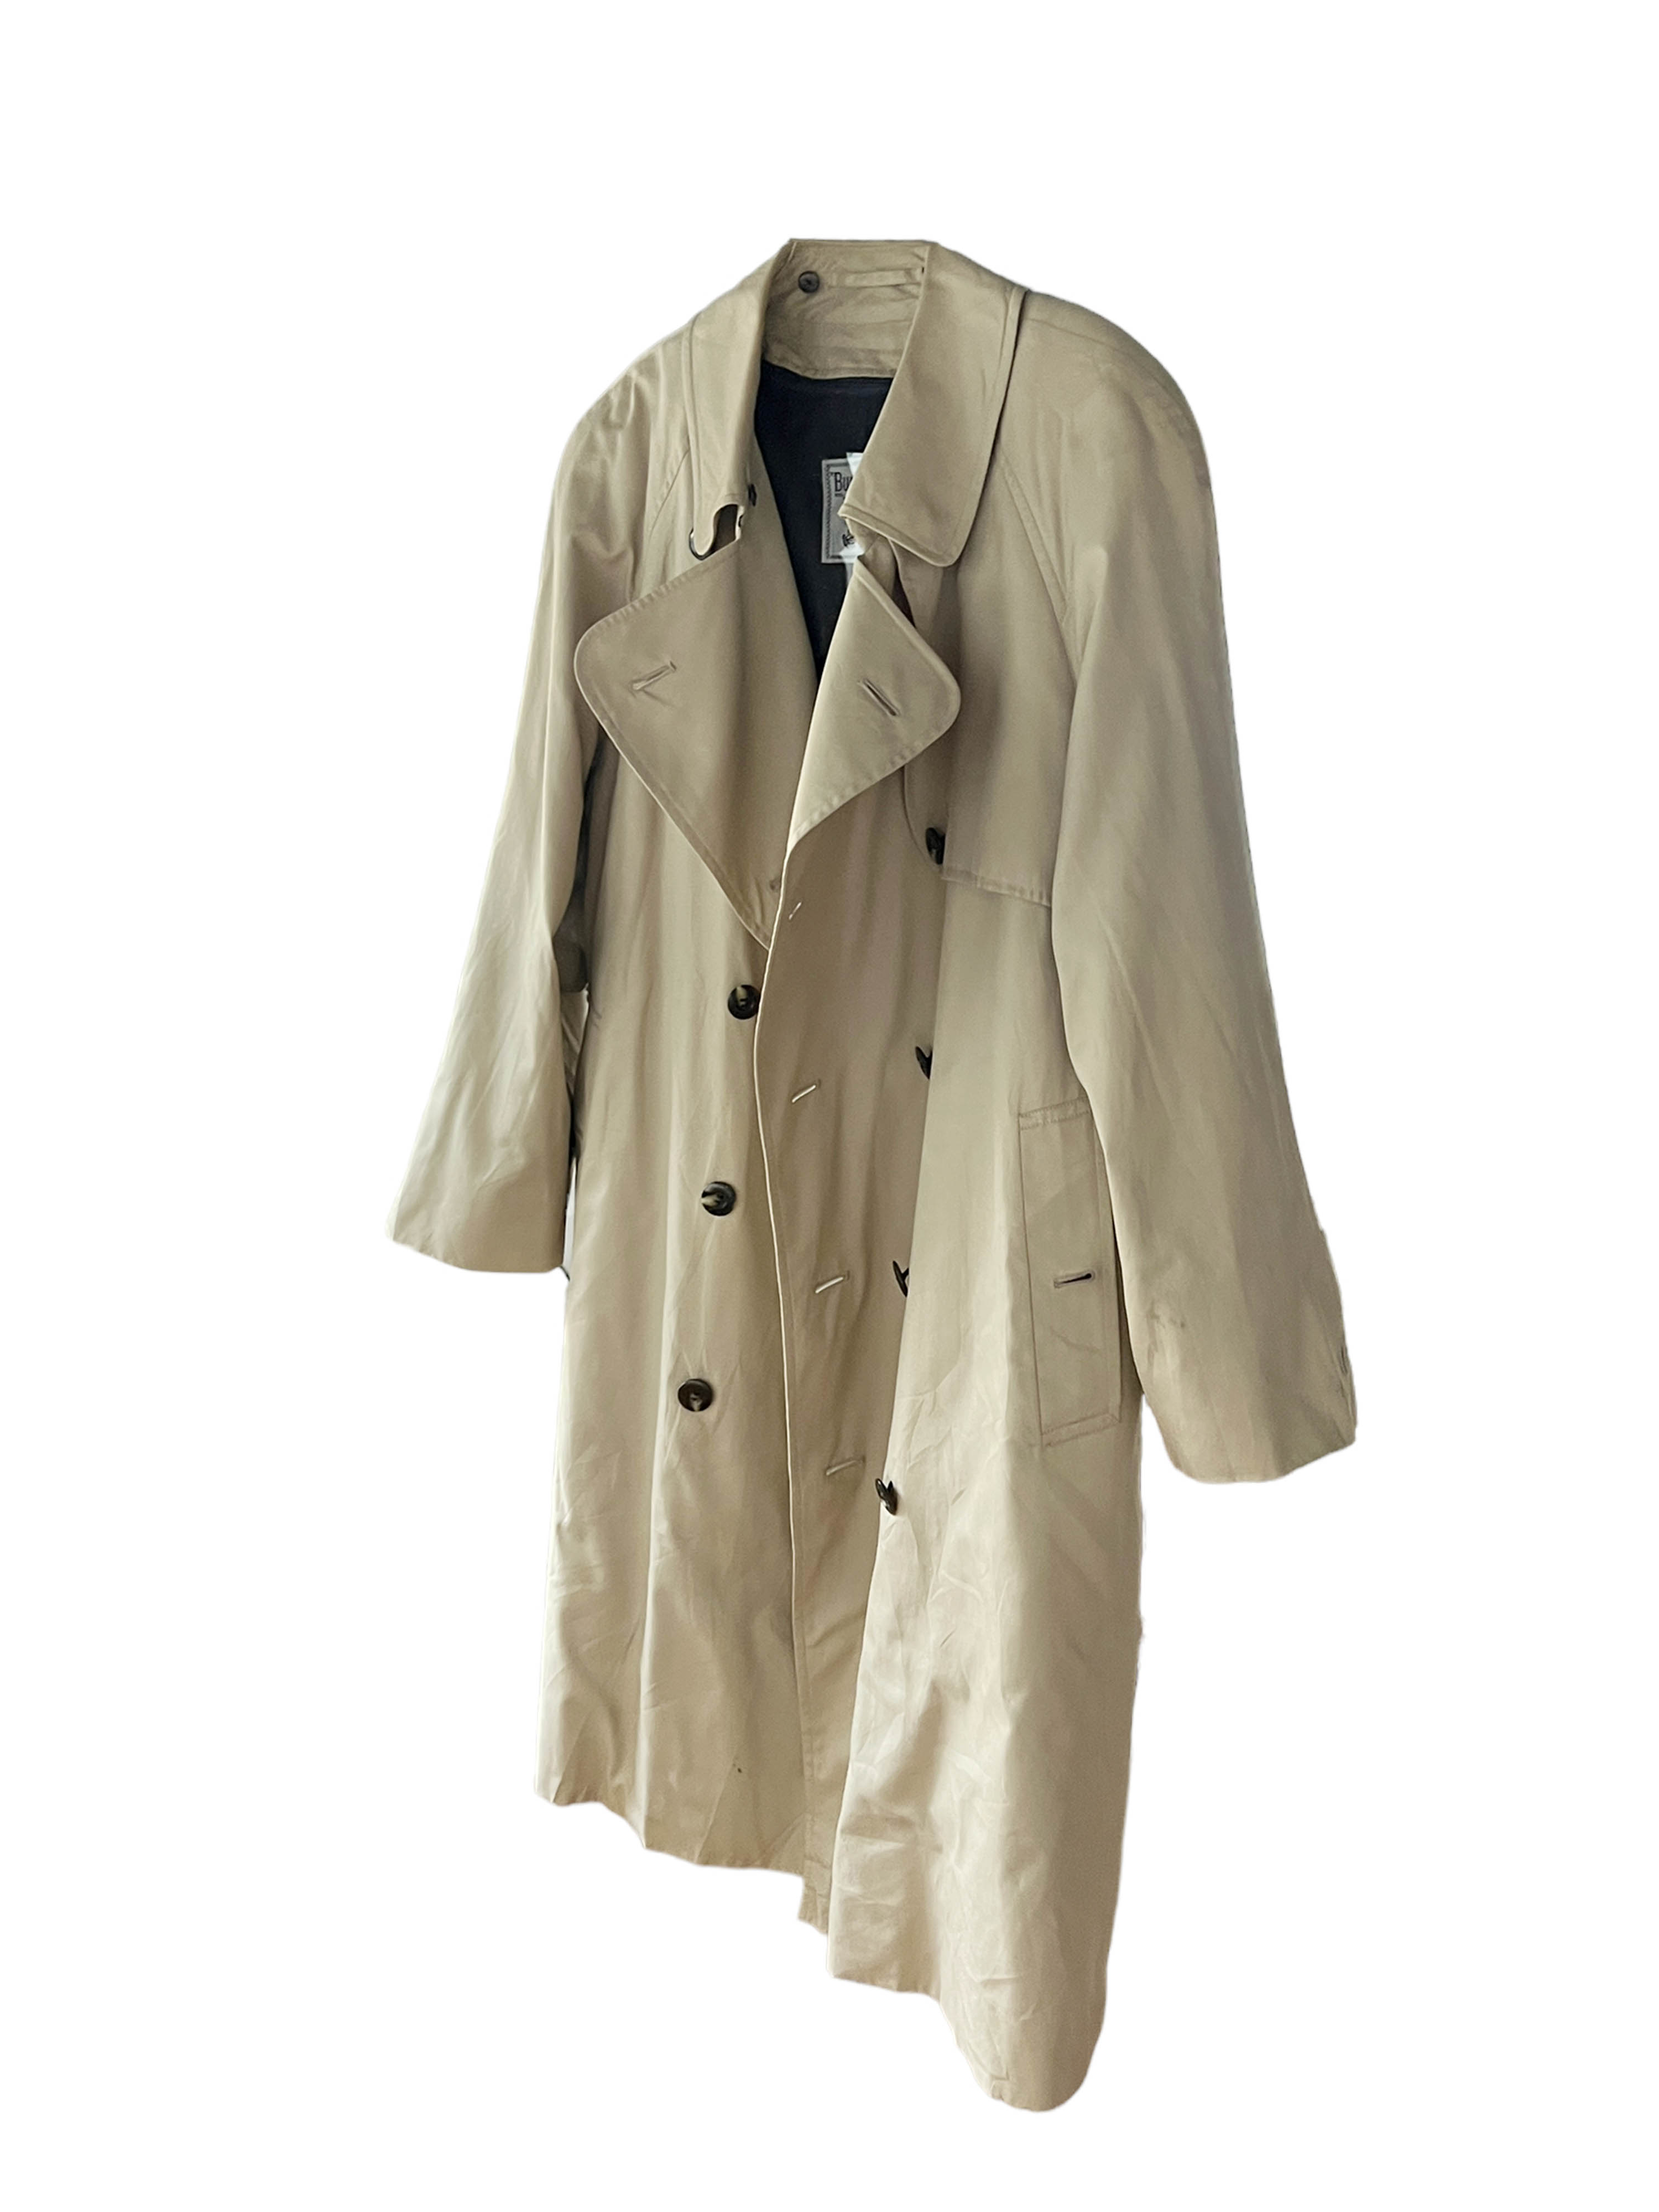 old Burberrys trench coat